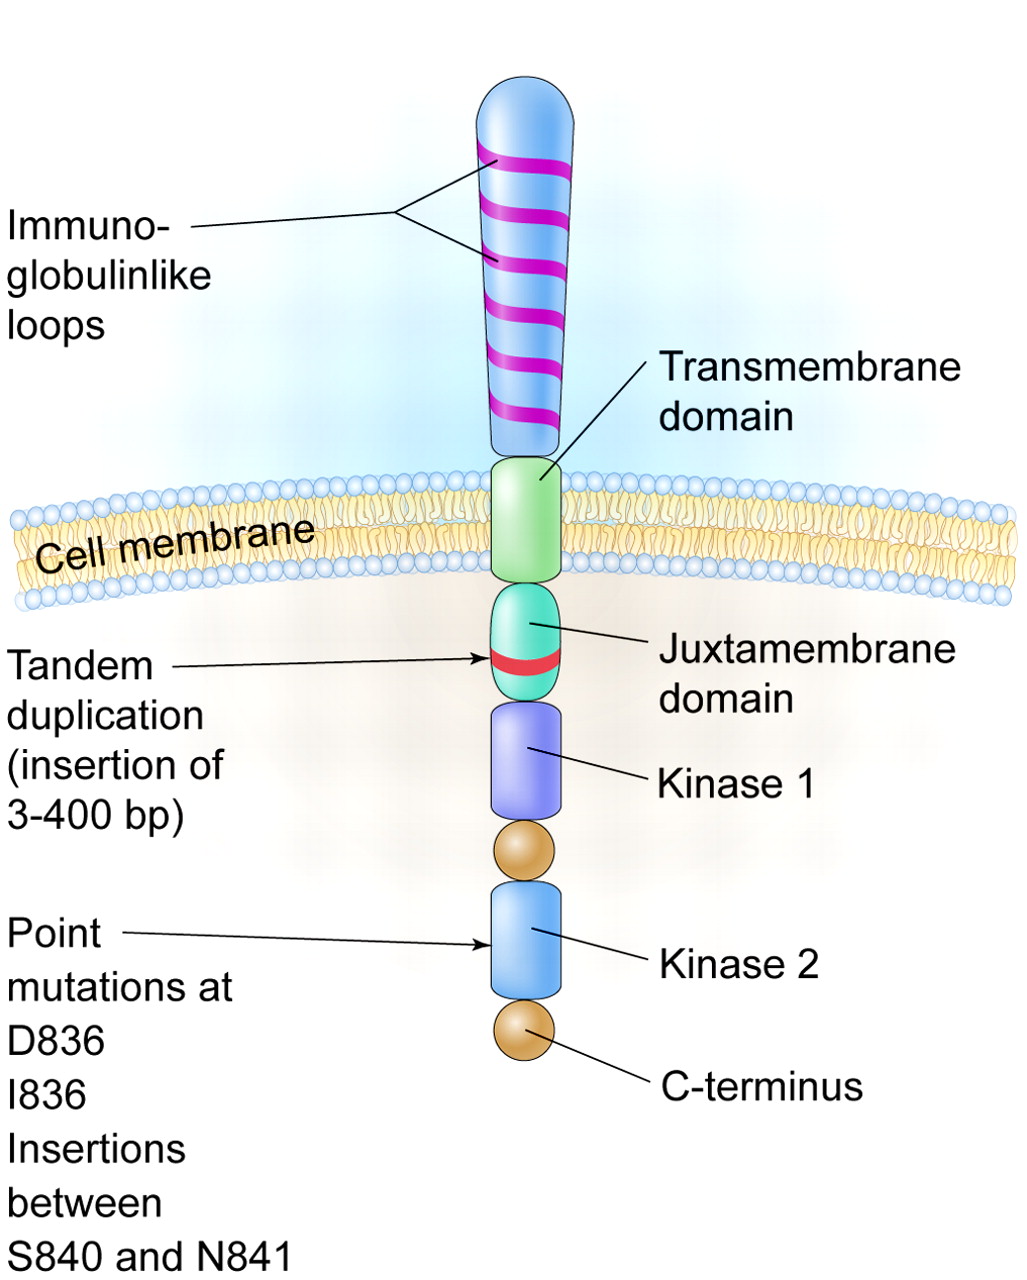 A schematic diagram of the FLT3 receptor tyrosine kinase showing the location of the internal tandem duplication of genes within the juxtamembrane domain and point mutations and gene insertions in the second kinase domain. http://www.bloodjournal.org/content/106/10/3331?sso-checked=true